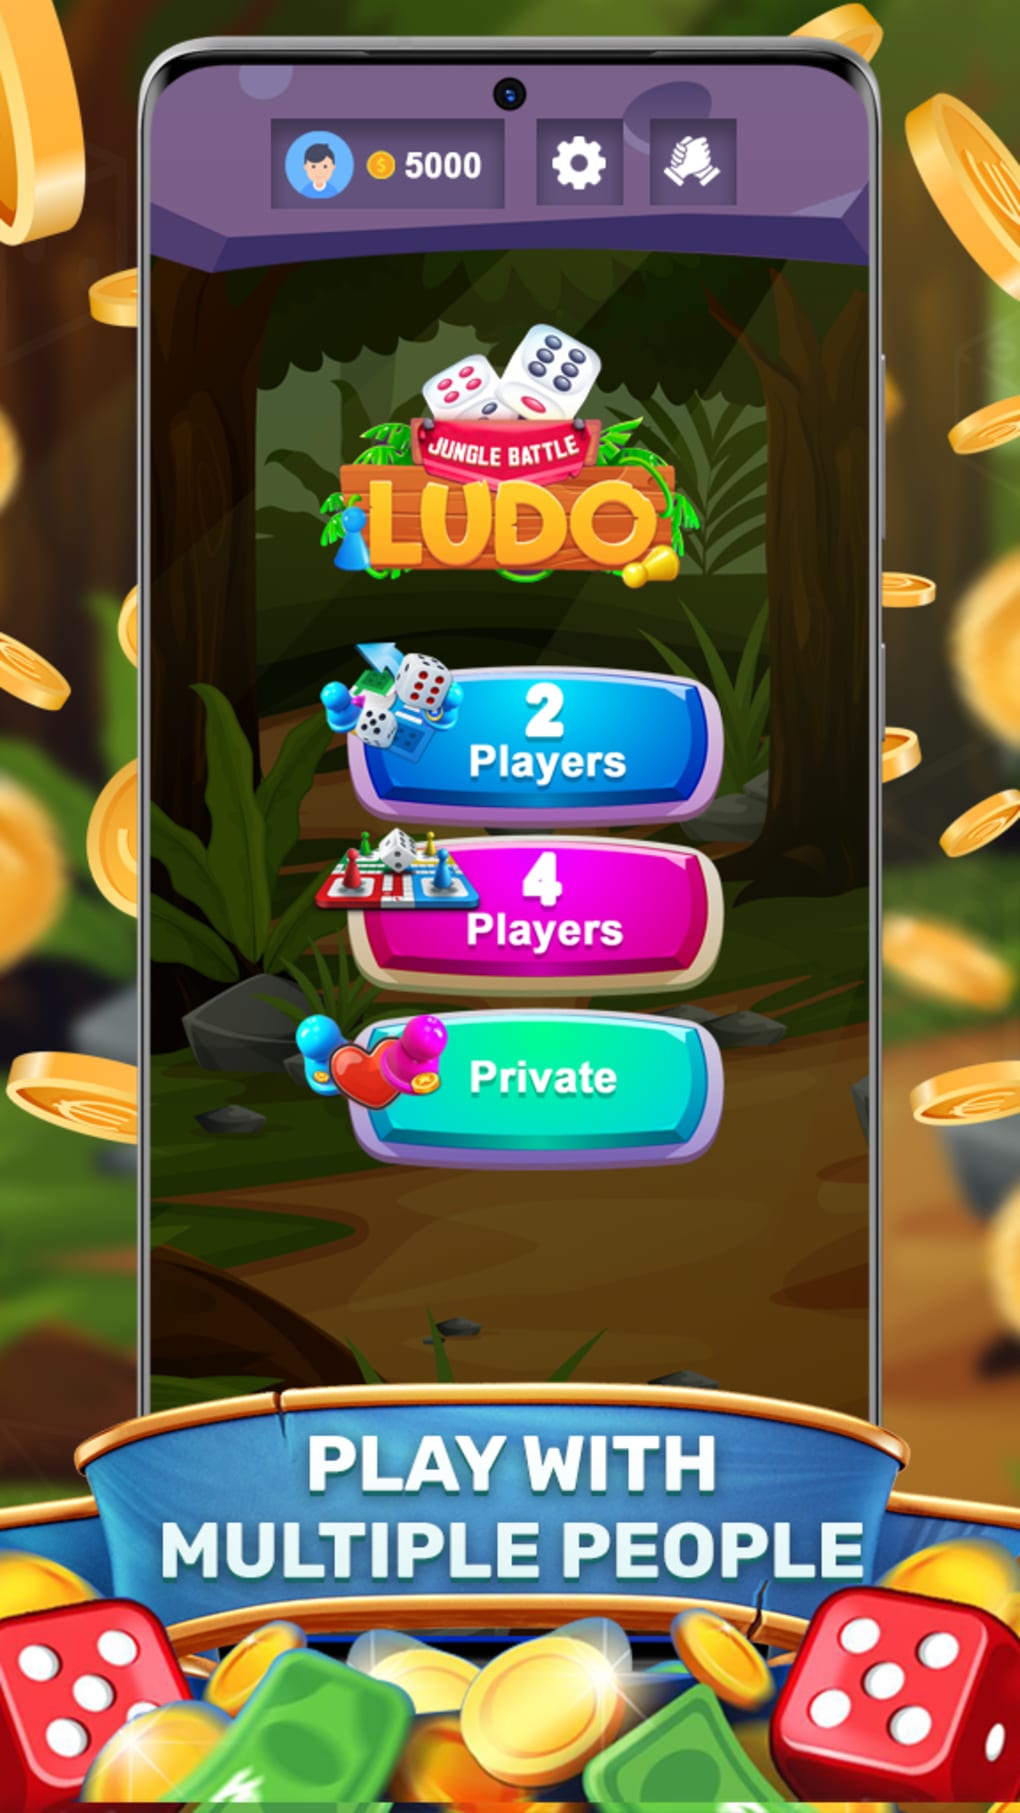 Battle Ludo Online Game for Android - Download